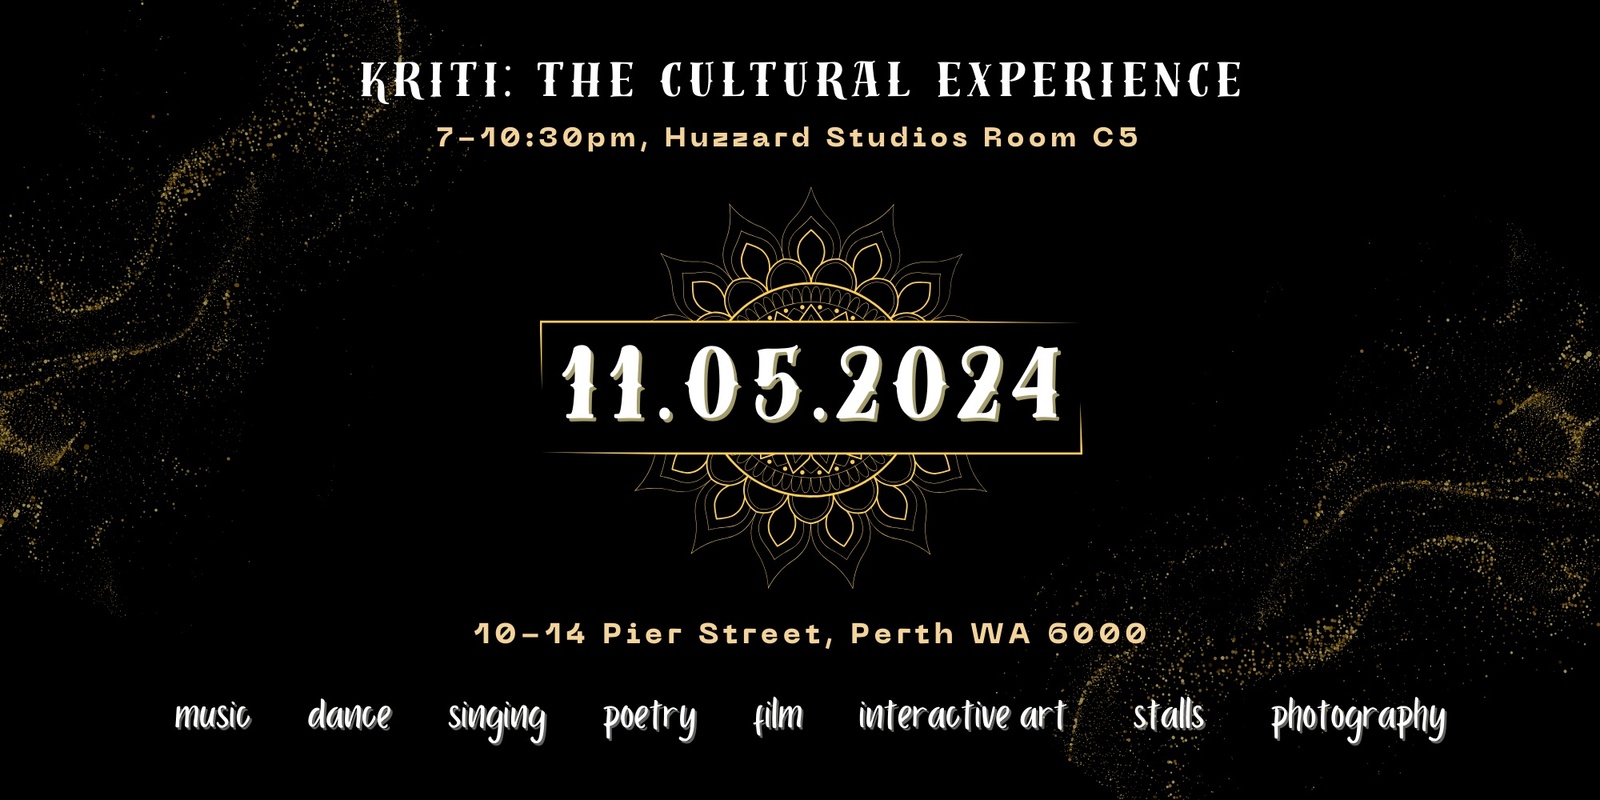 Banner image for KRITI 1 - The Cultural Experience